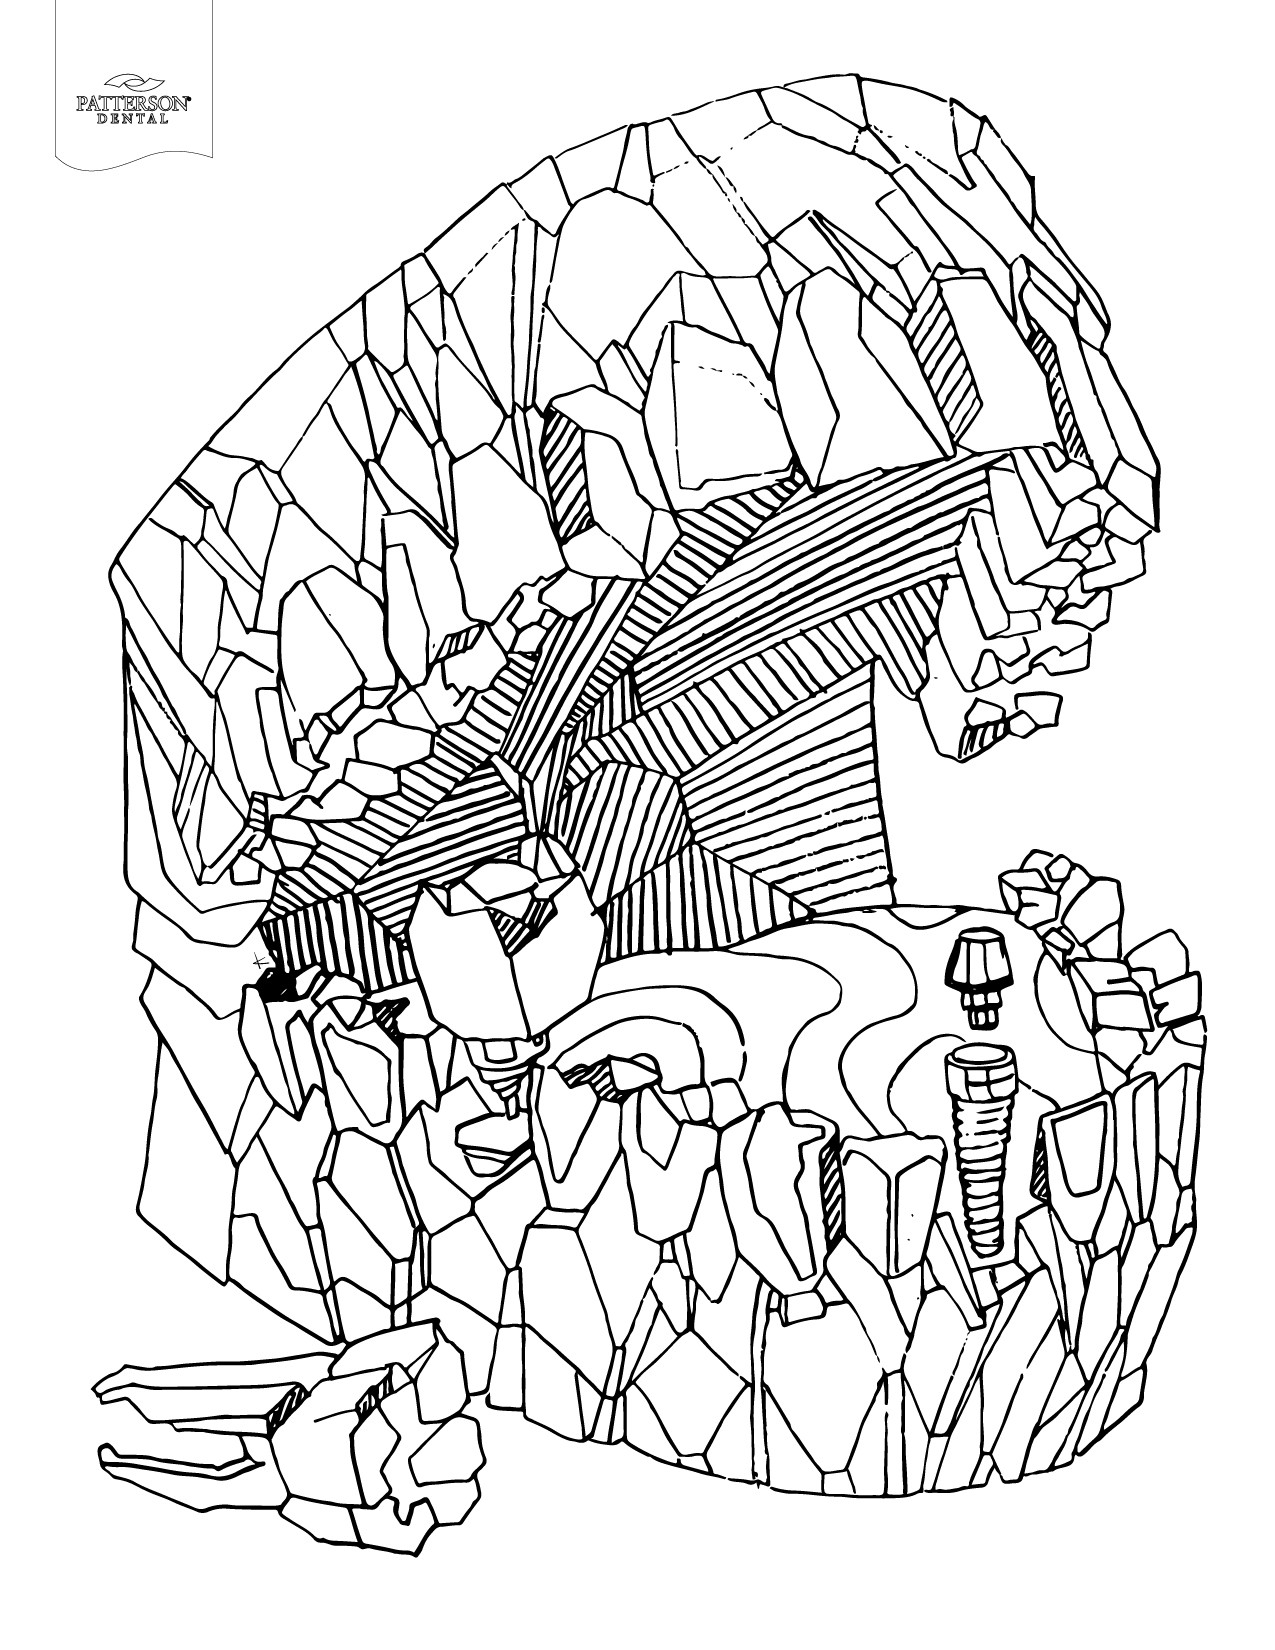 Coloring Pages Adults
 10 Toothy Adult Coloring Pages [Printable] f The Cusp